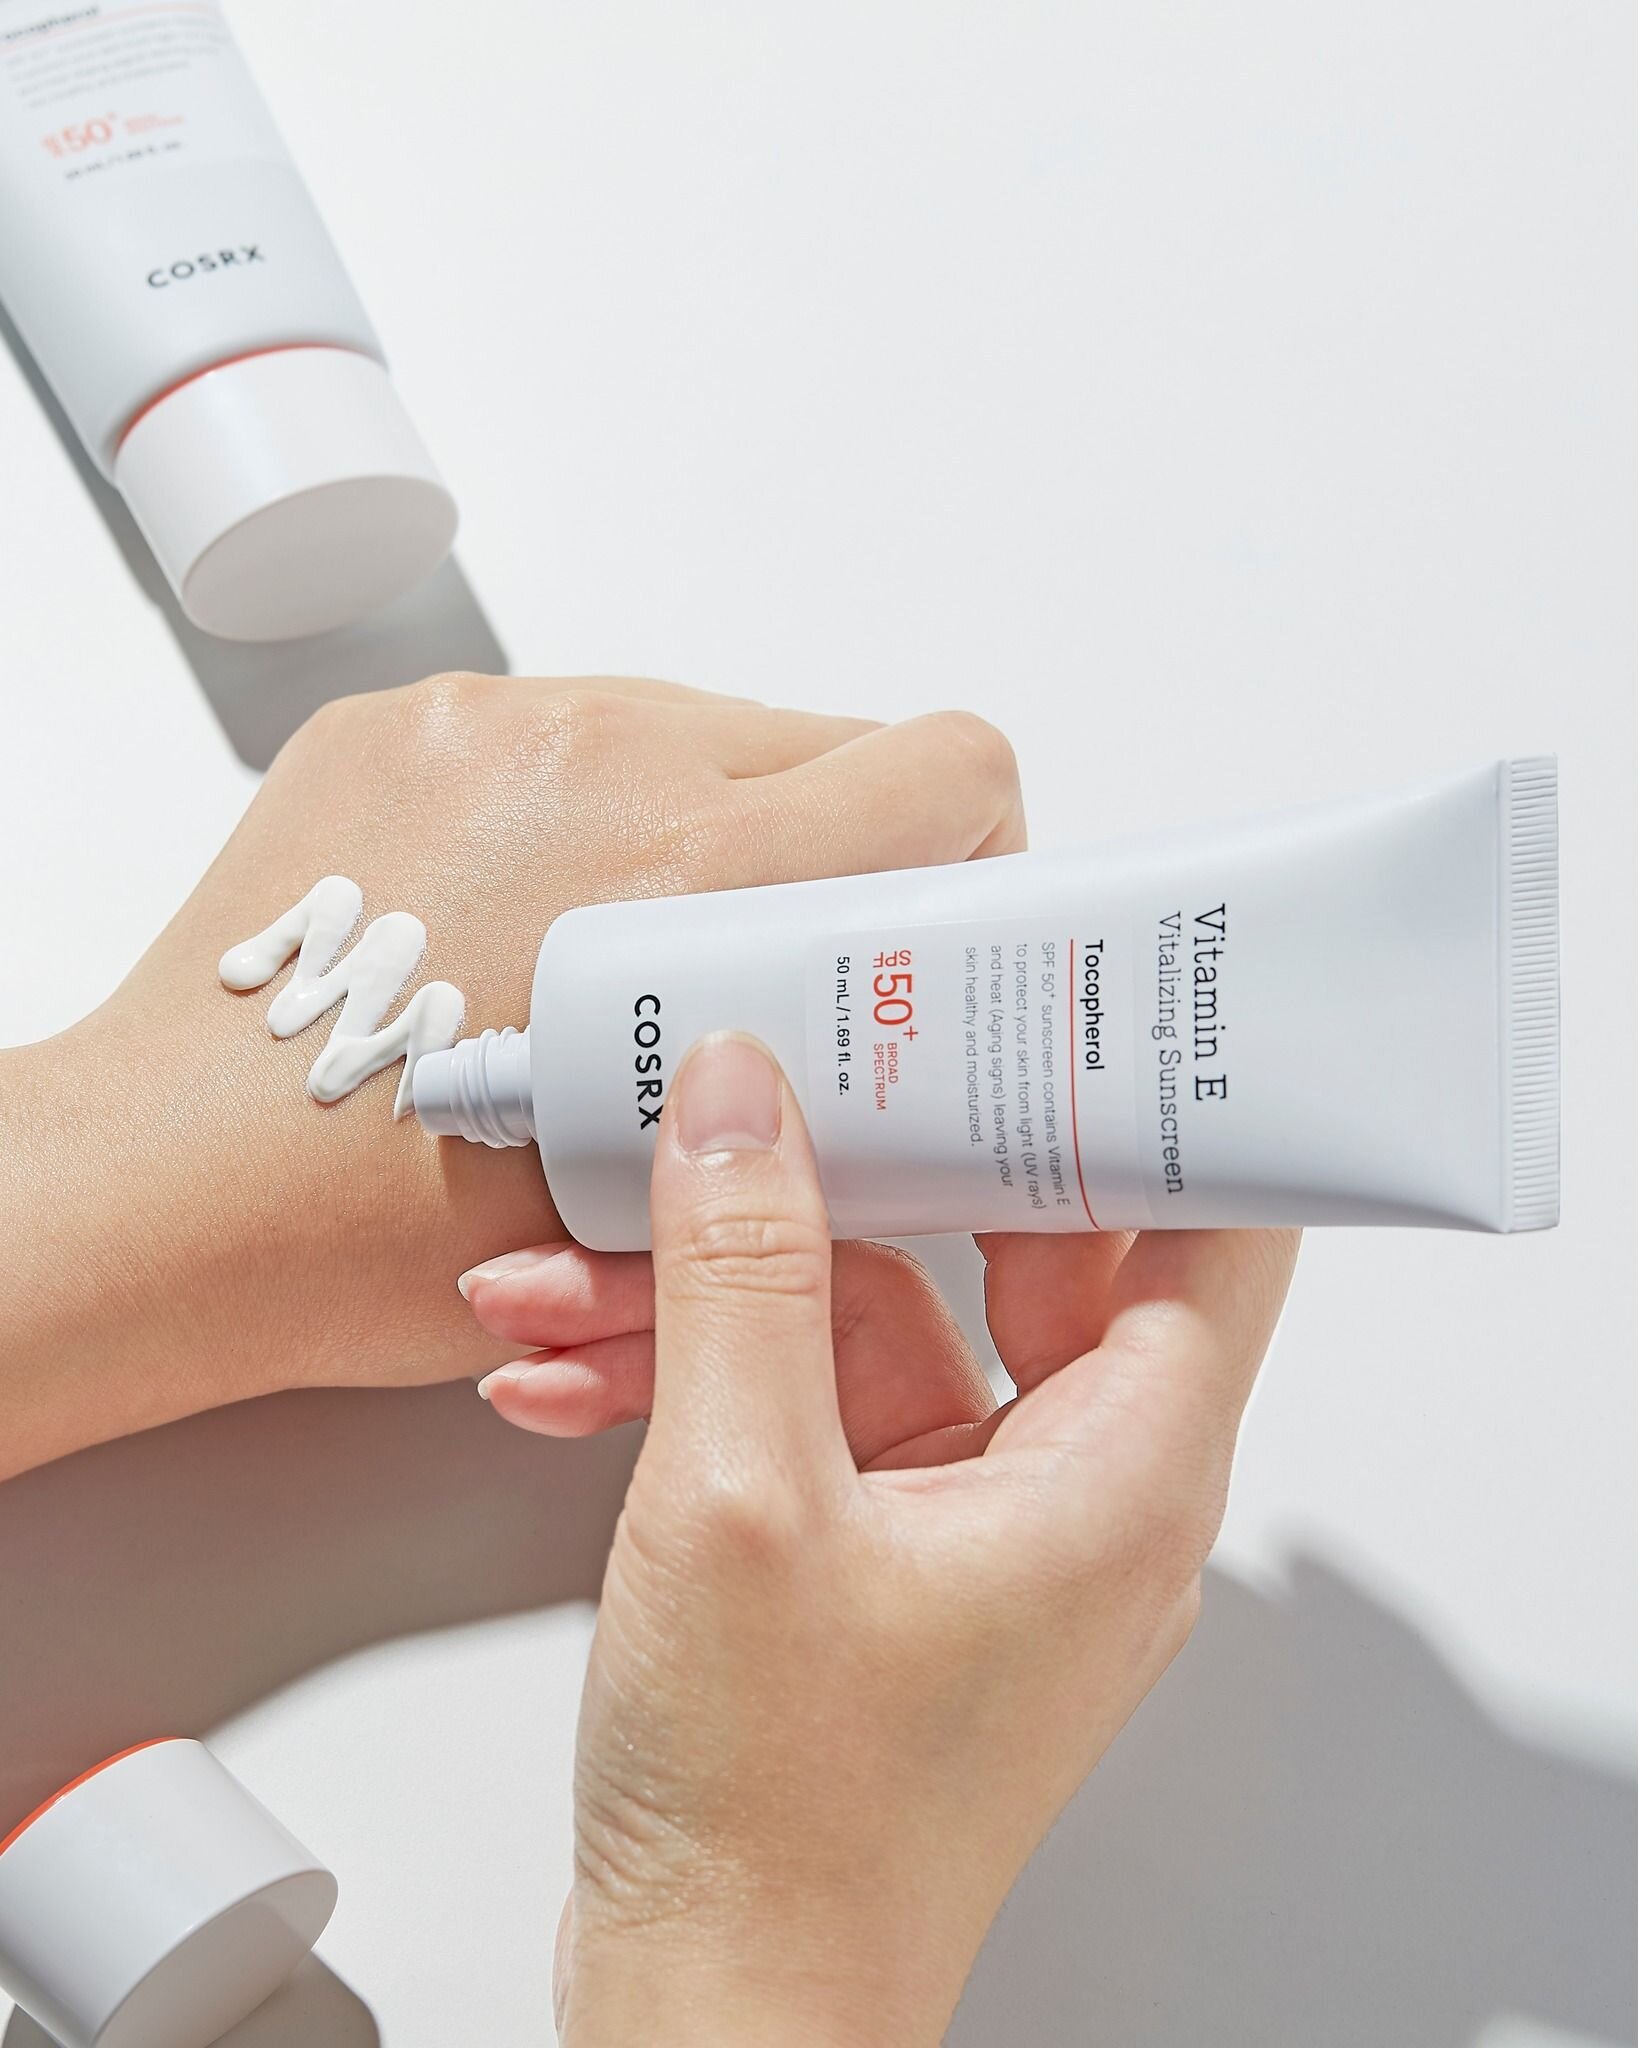 New sunscreen recommendation! This sunscreen from COSRX is a clinically-proven sunscreen with high SPF that blocks UV rays to the strongest degree to effectively prevent skin damages and early signs of aging. It's formulated with Vitamin E and strong